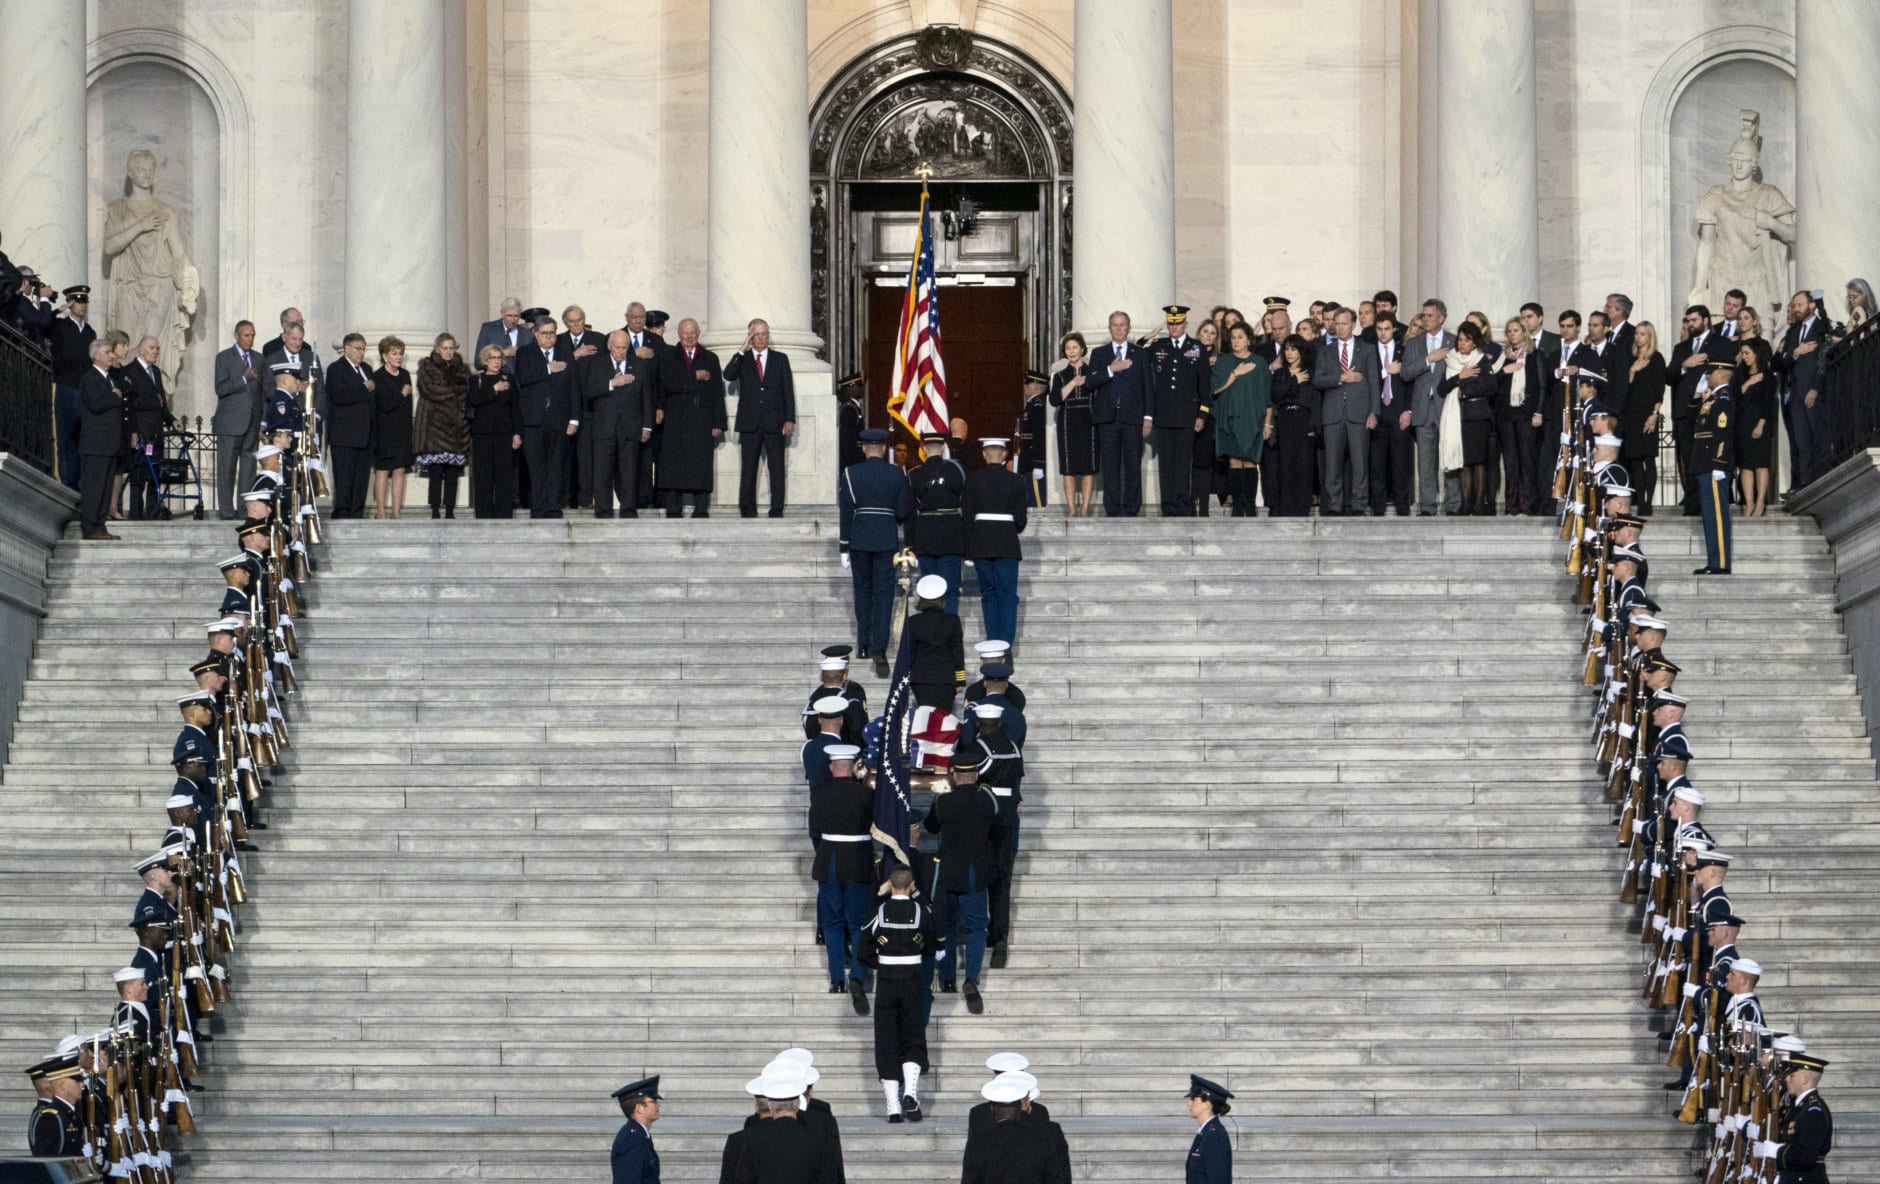 Family members and others watch as the flag-draped of former President George H.W. Bush is carried by a joint services military honor guard to lie in state in the rotunda of the U.S. Capitol, Monday, Dec. 3, 2018, in Washington. (Doug Mills/The New York Times via AP, Pool)